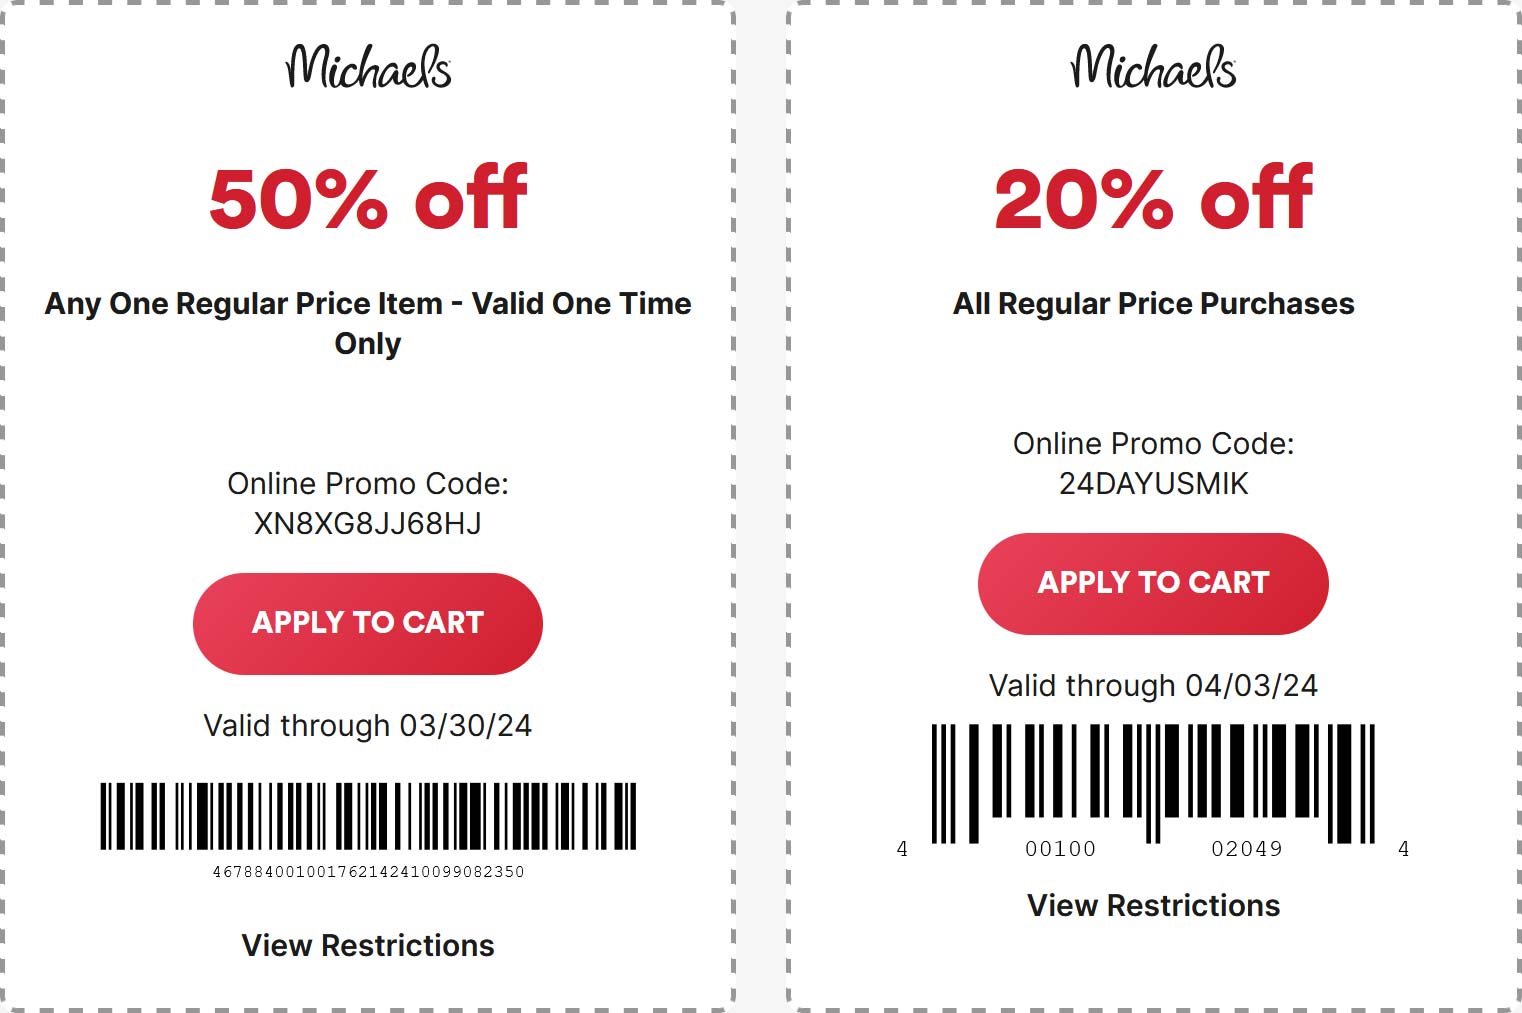 Michaels stores Coupon  50% off a single item at Michaels, or online via promo code XN8XG8JJ68HJ #michaels 